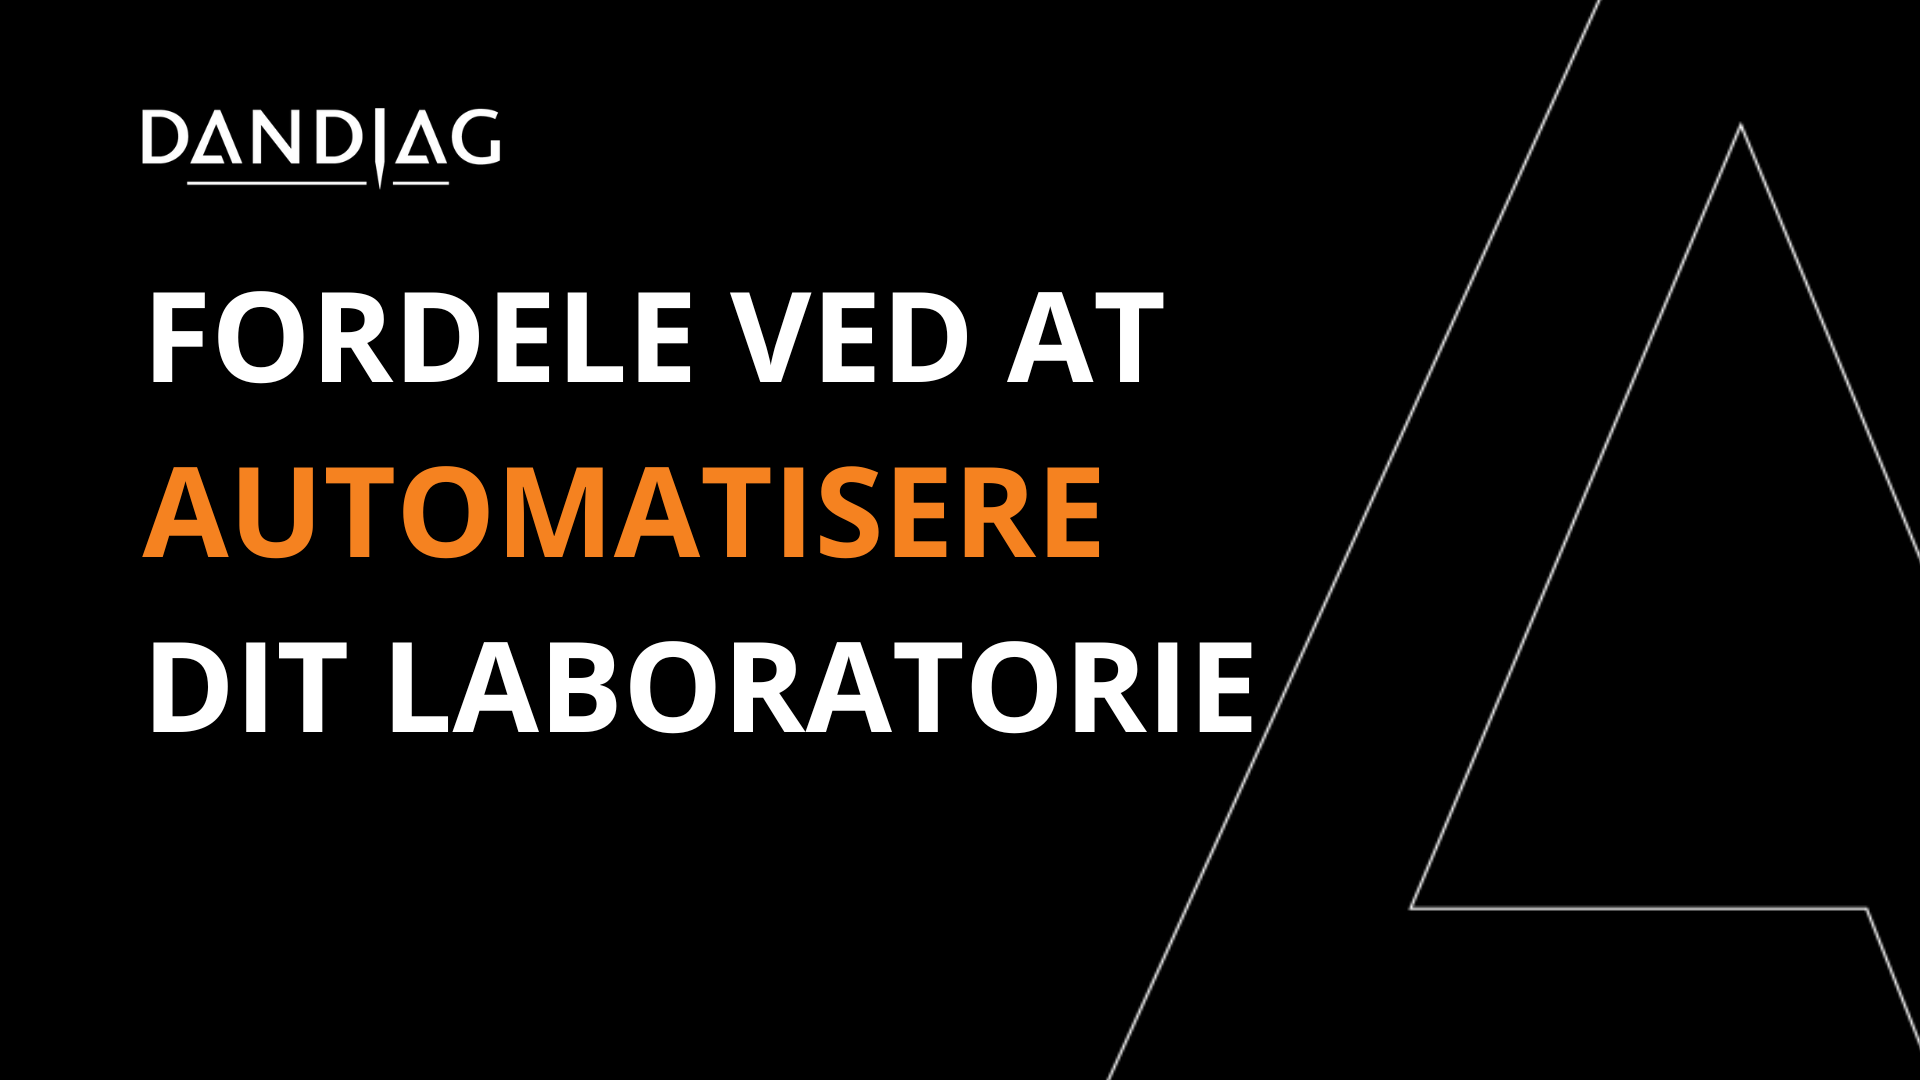 FORDELE VED AT AUTOMATISERE DIT LABORATORIE